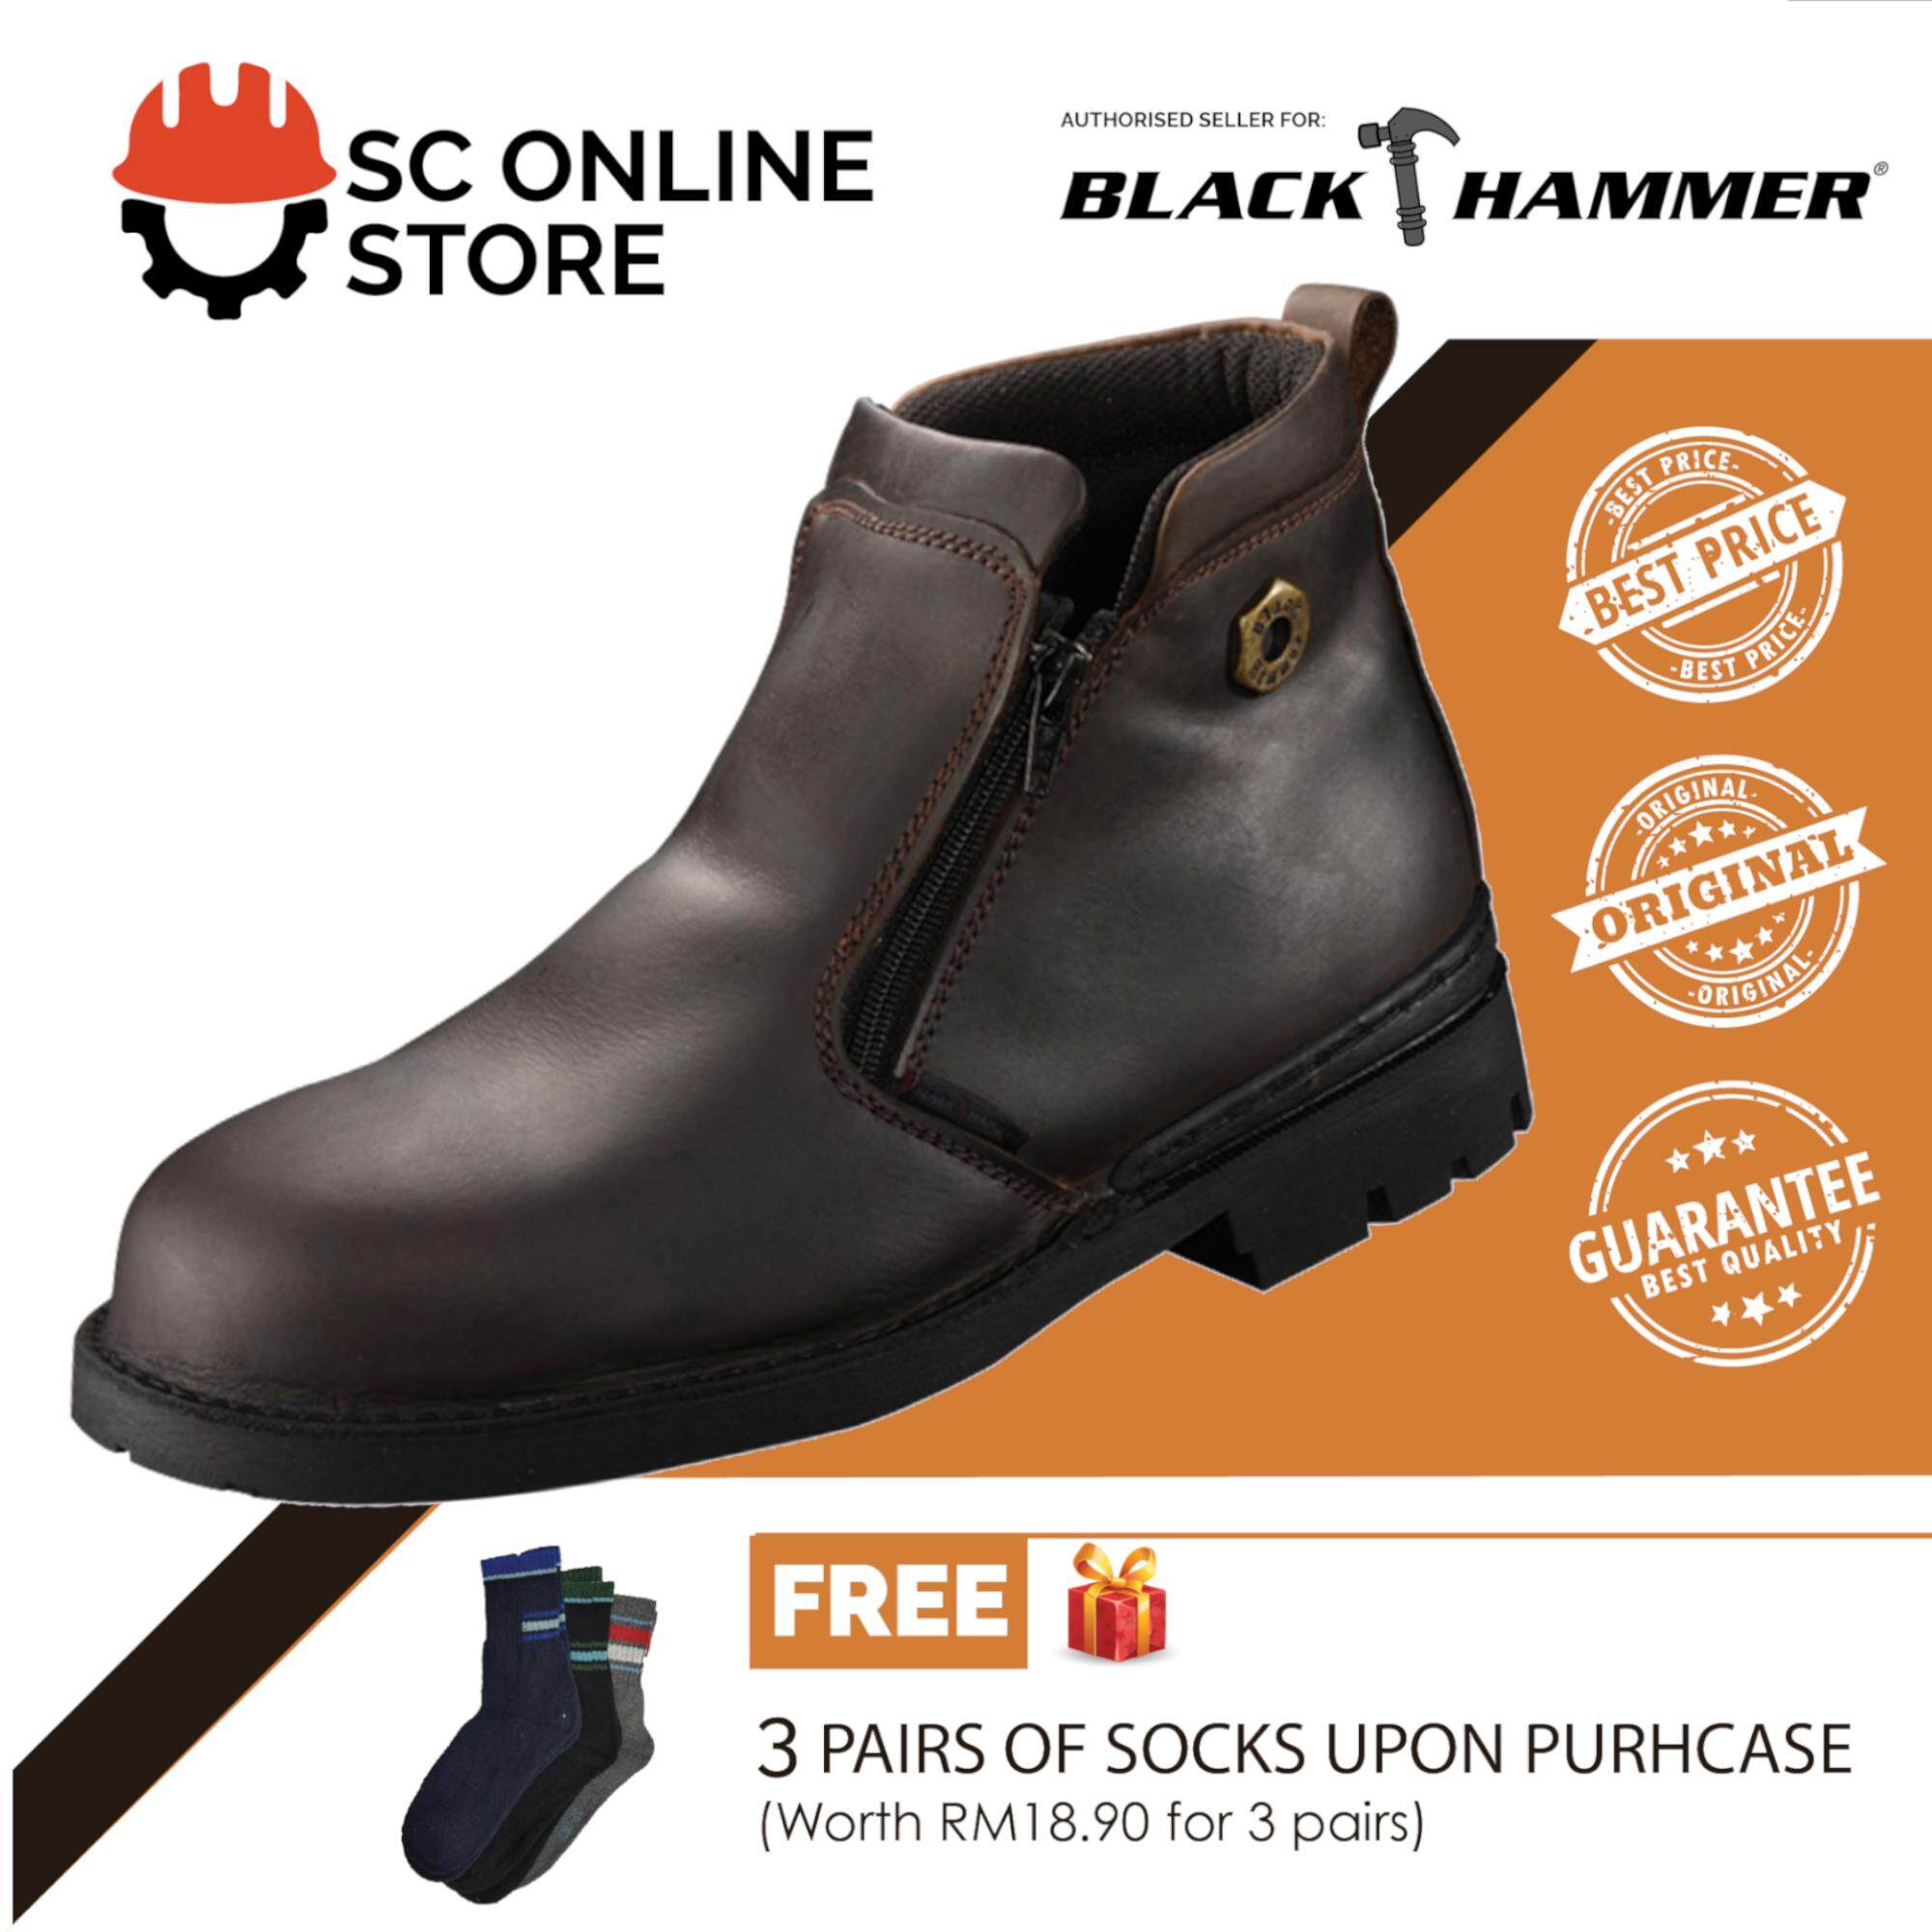 Hammer Kings Safety Shoes 13006: Buy 